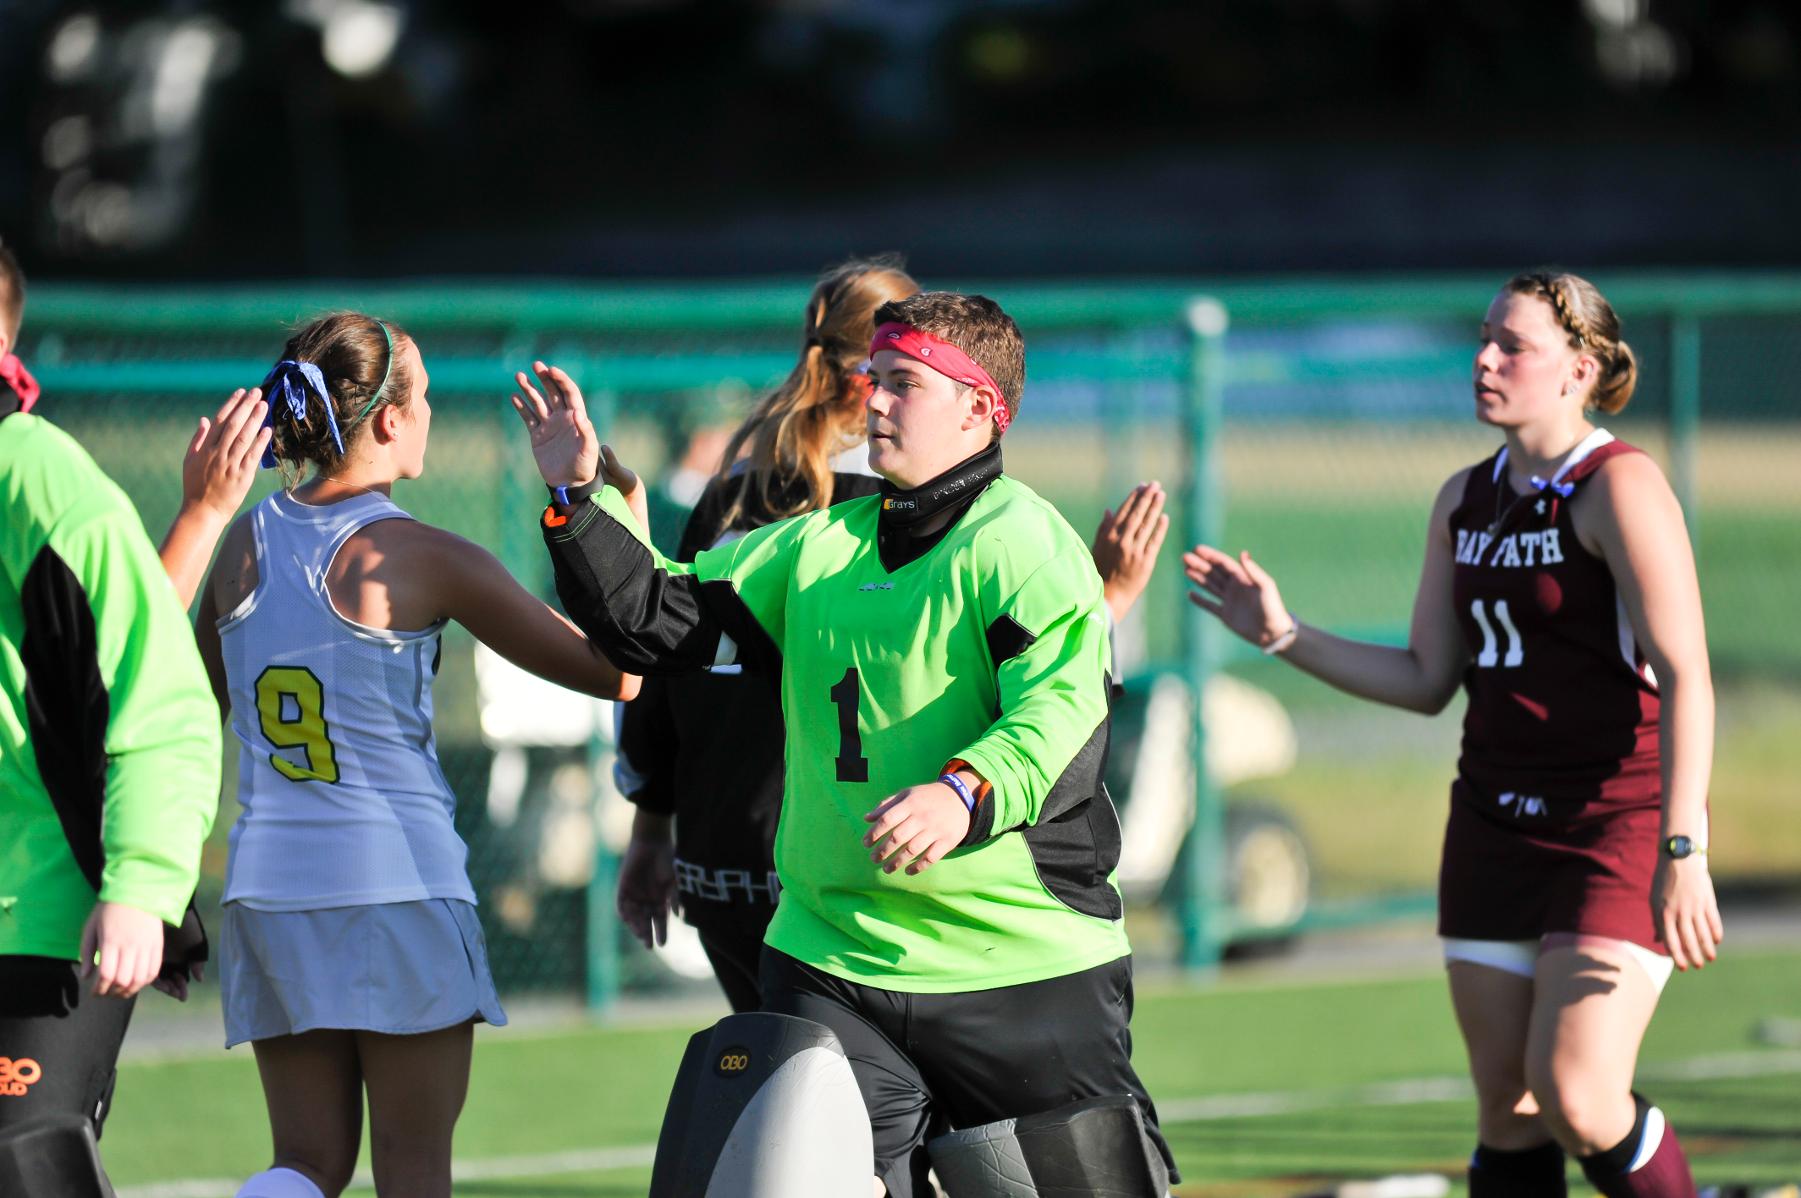 Meyer Selected to participate in NFHCA Senior All-Star Game